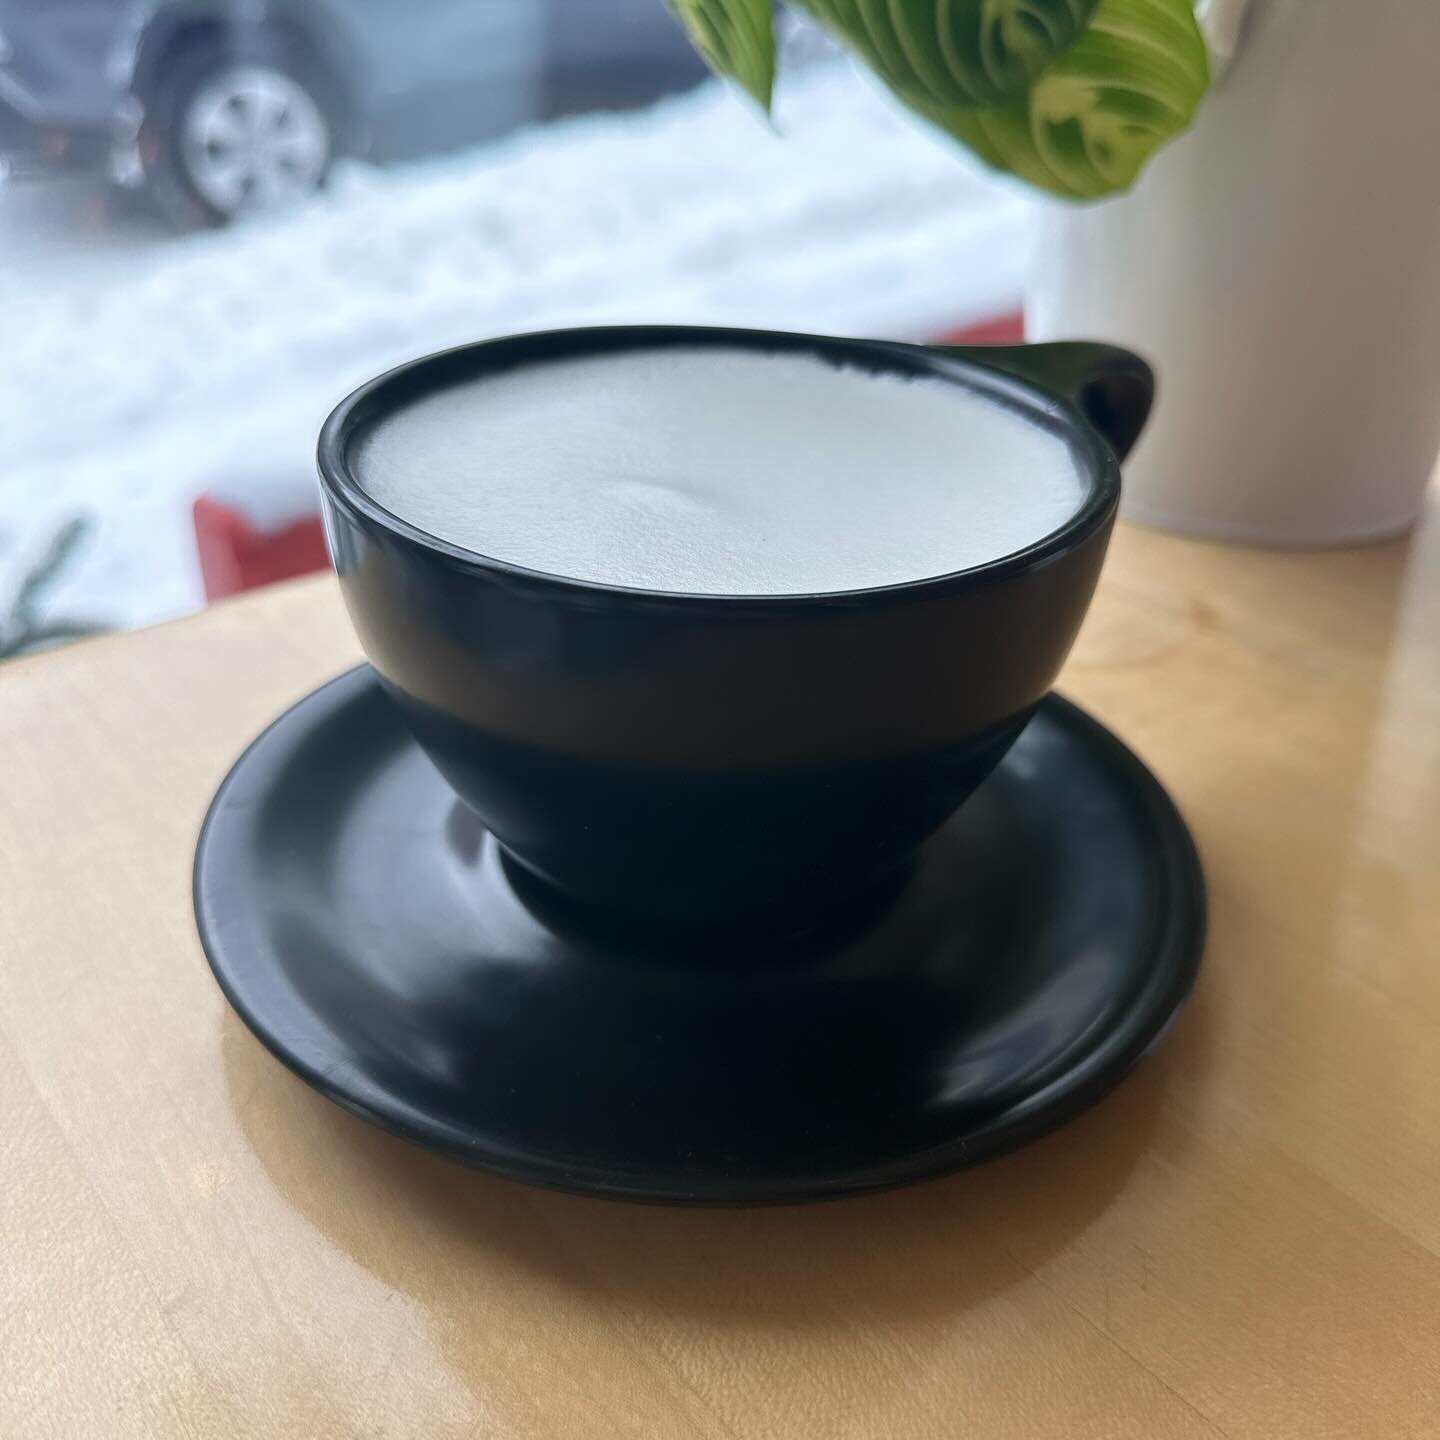 The Fog! A crew and customer fav! One of our best sellers, the Petoskey Fog our version of the London Fog&hellip; Earl Grey Tea, Steamed Milk and hint of vanilla. This drink originated in Vancouver, Canada named after the weather in London&hellip; as